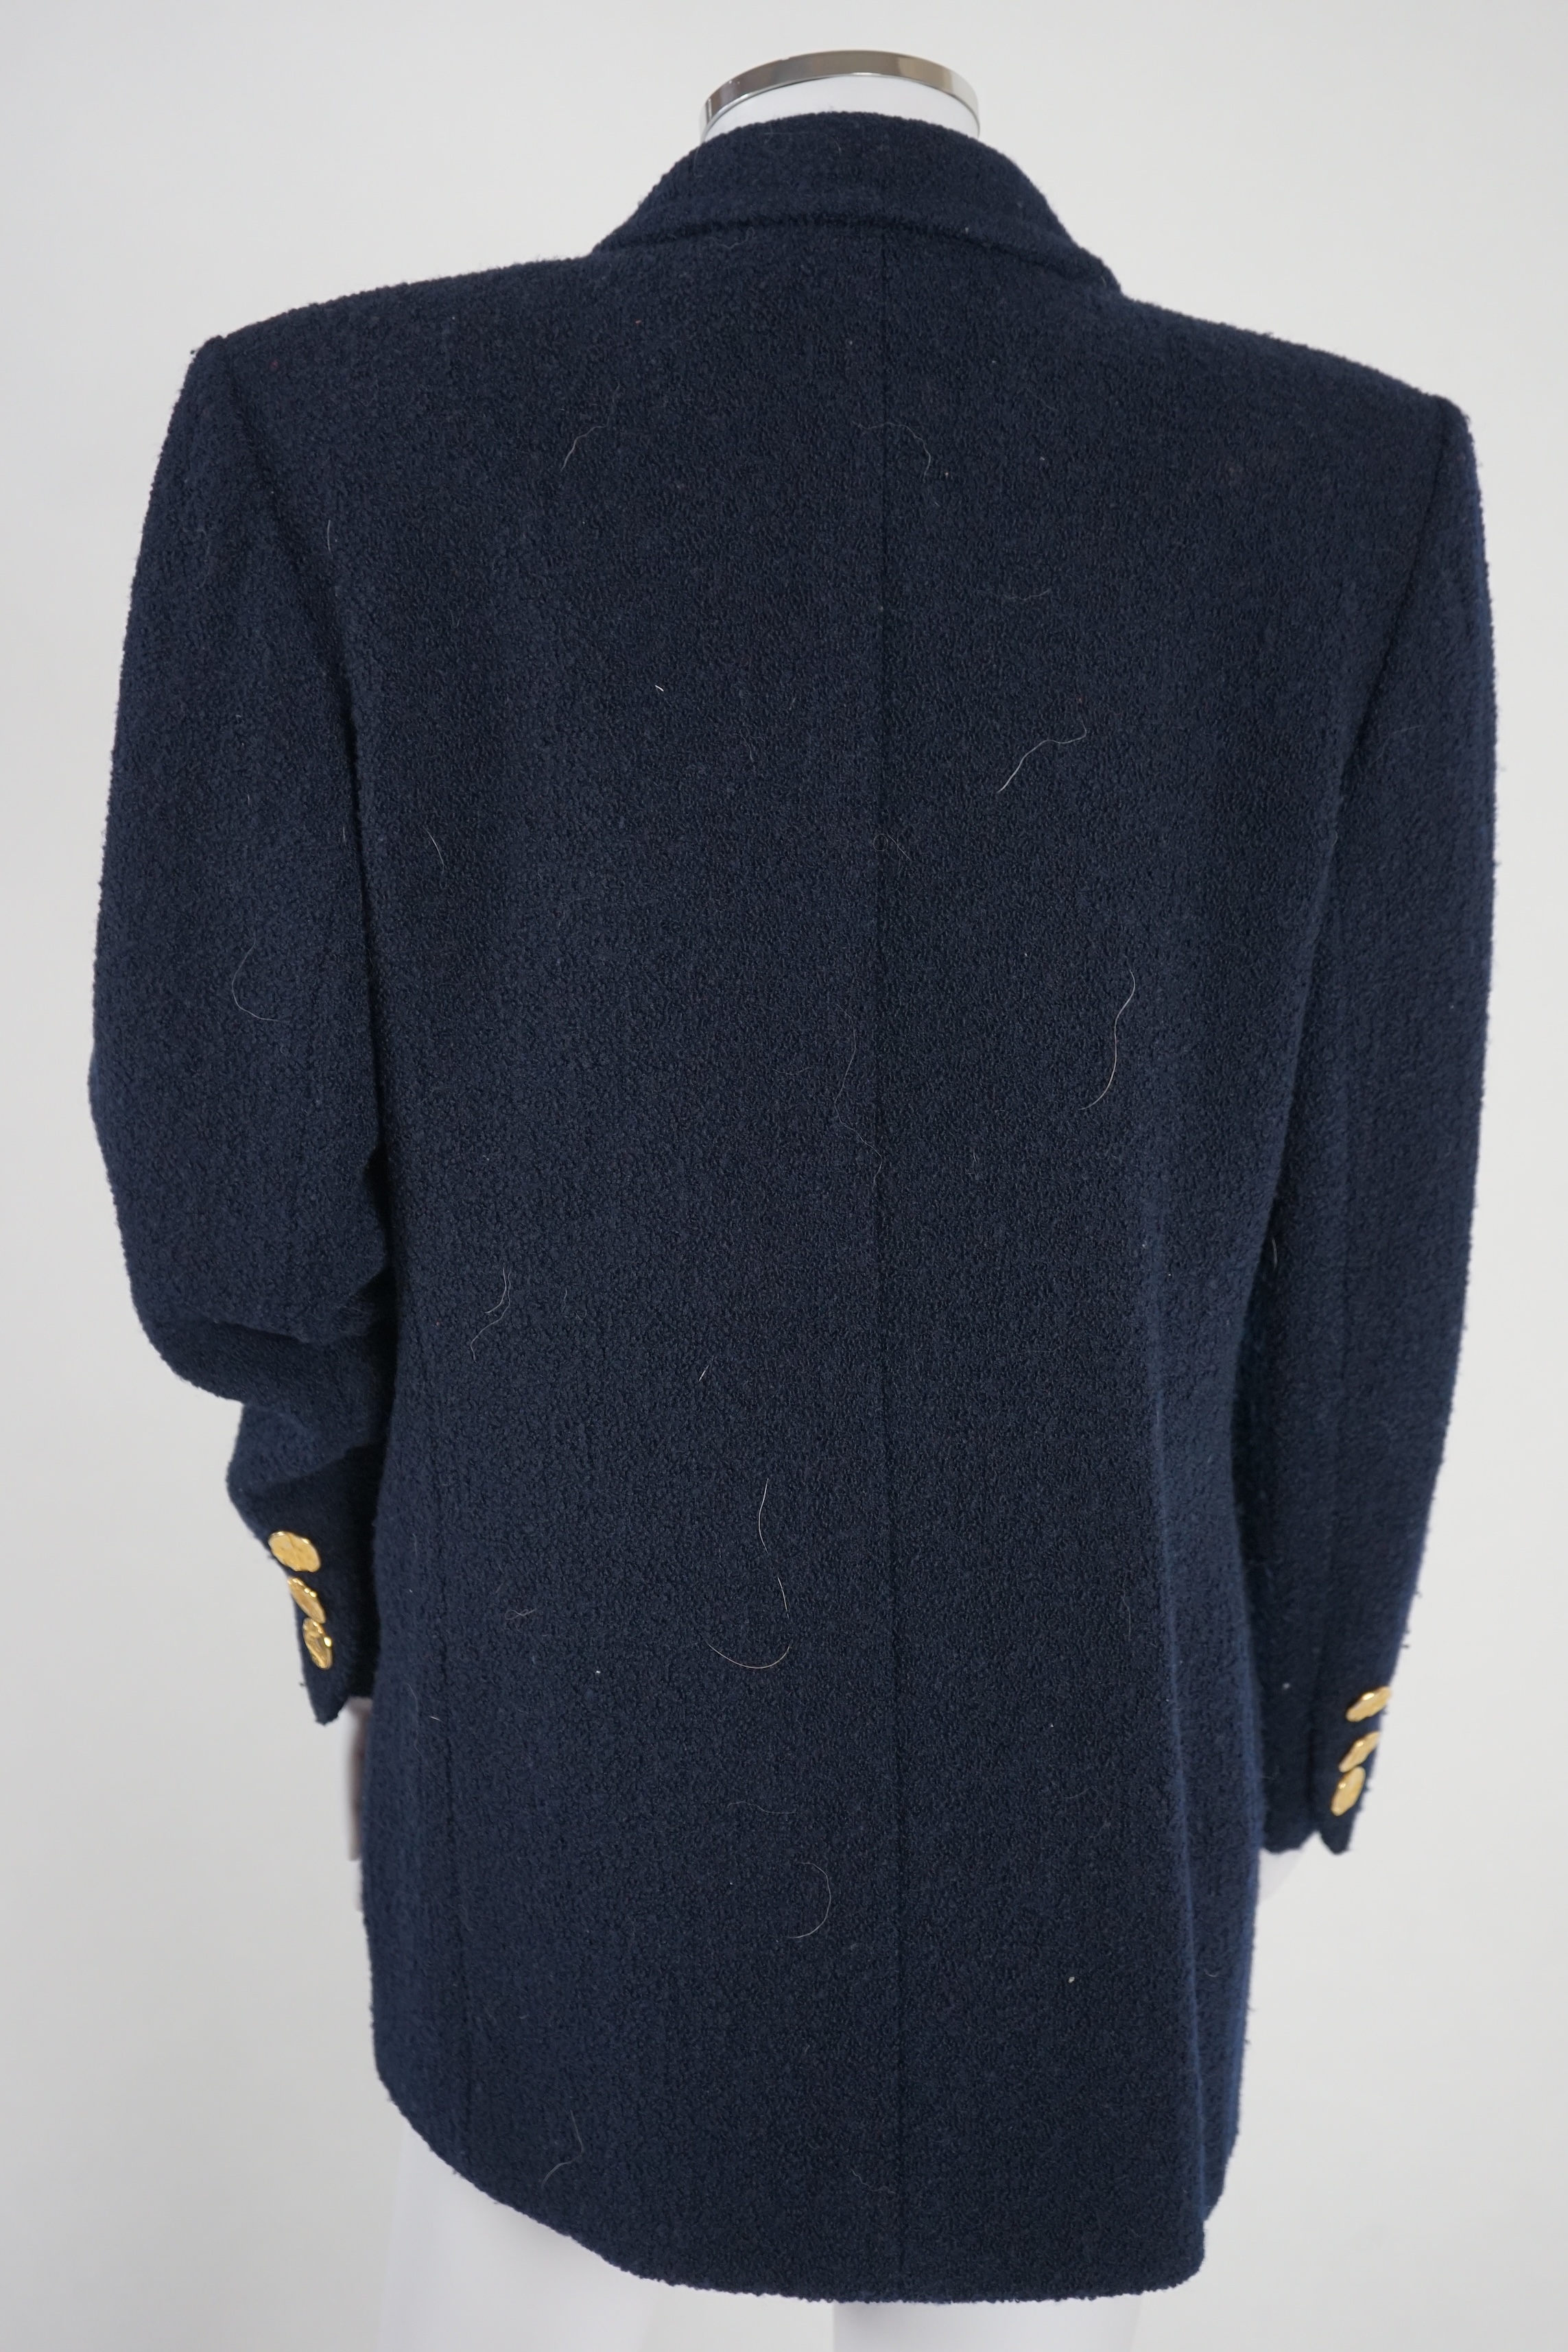 A vintage Yves Saint Laurent variation lady's navy blue wool textured blazer, F 40 (UK 12). Proceeds to Happy Paws Puppy Rescue